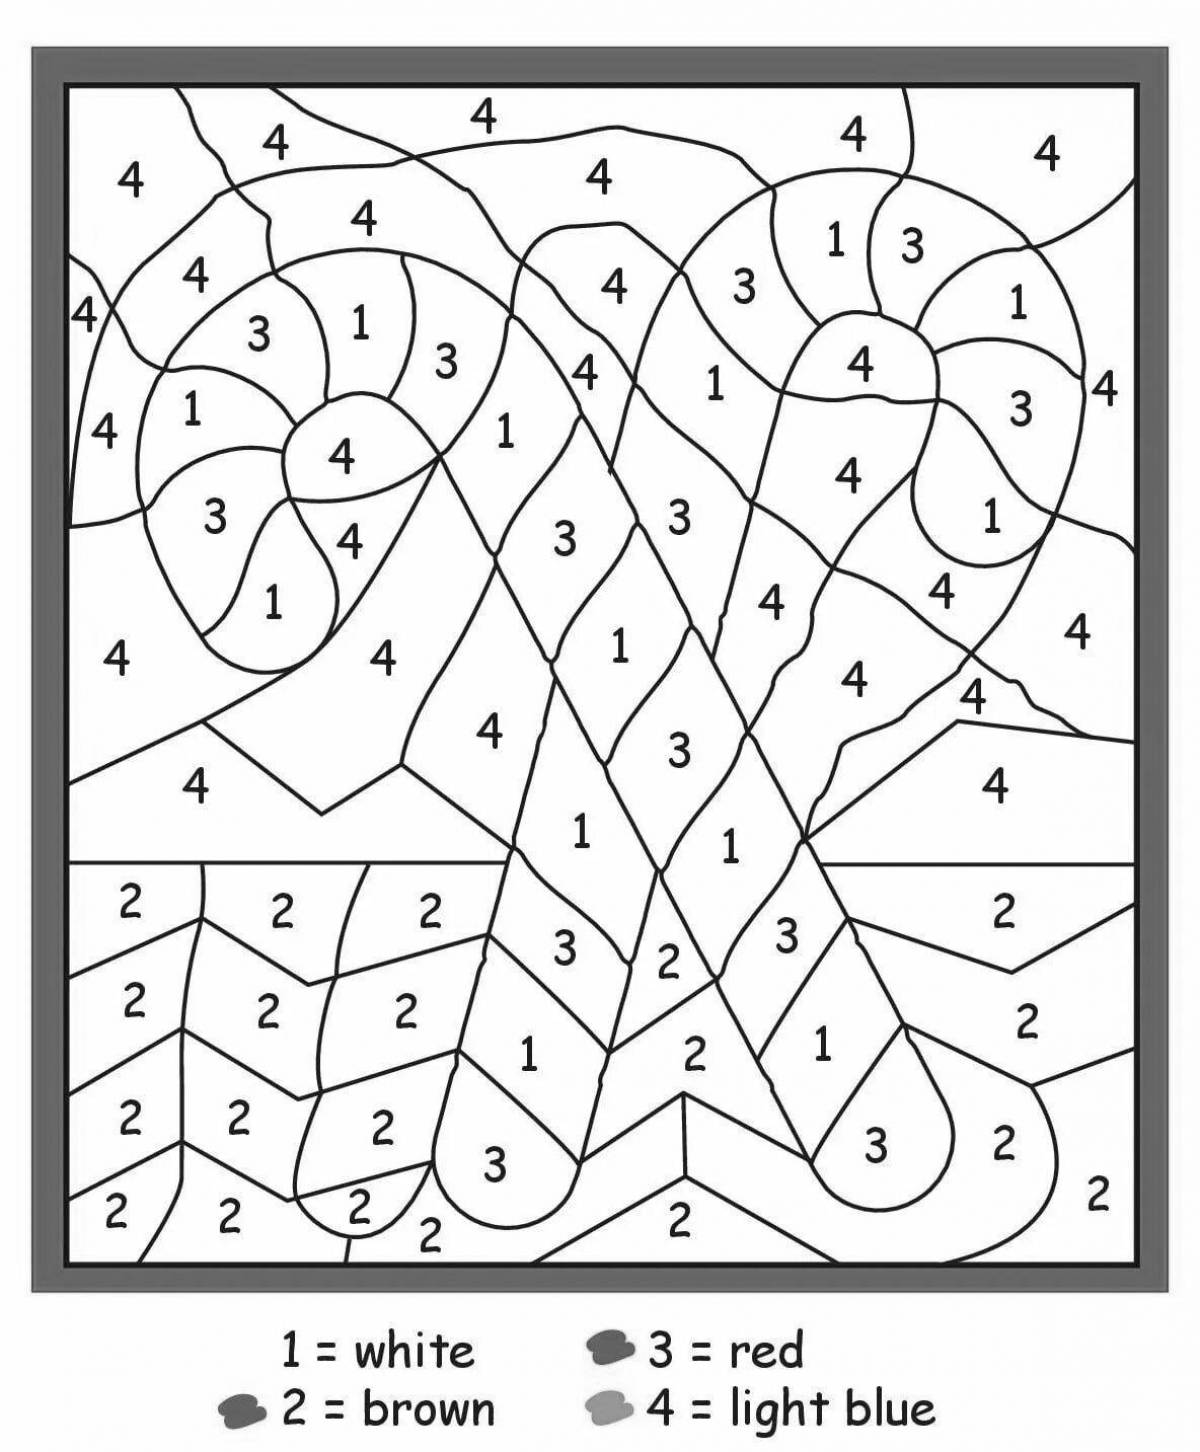 Fancy Christmas tree coloring by numbers